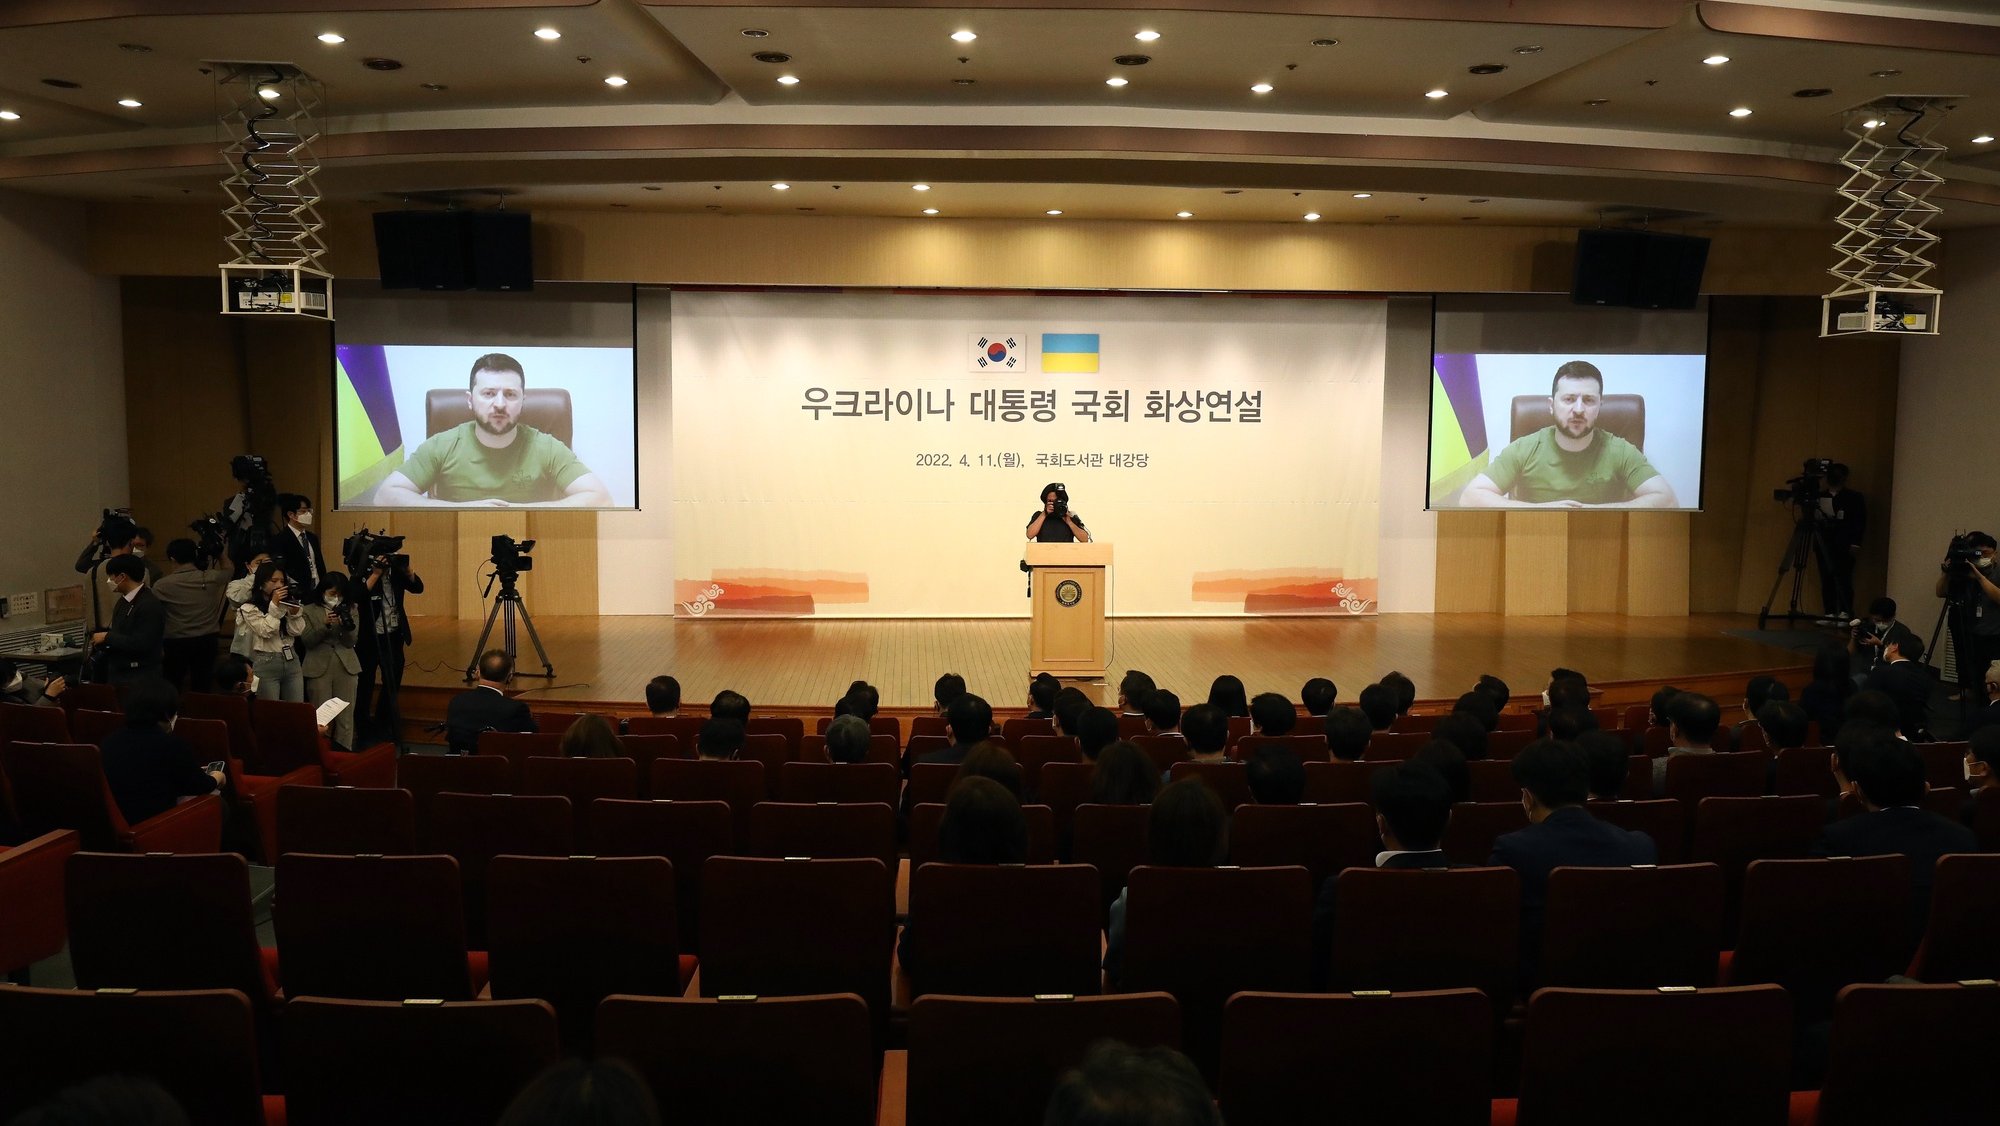 epa09884203 Ukrainian President Volodymyr Zelensky addresses the South Korean parliamentary via video link at the National Assembly in Seoul, South Korea, 11 April 2022. Zelensky has been making a virtual world tour in recent weeks, lobbying foreign governments by video to help Ukraine defend itself against Russia&#039;s invasion.  EPA/Chung Sung-Jun / POOL